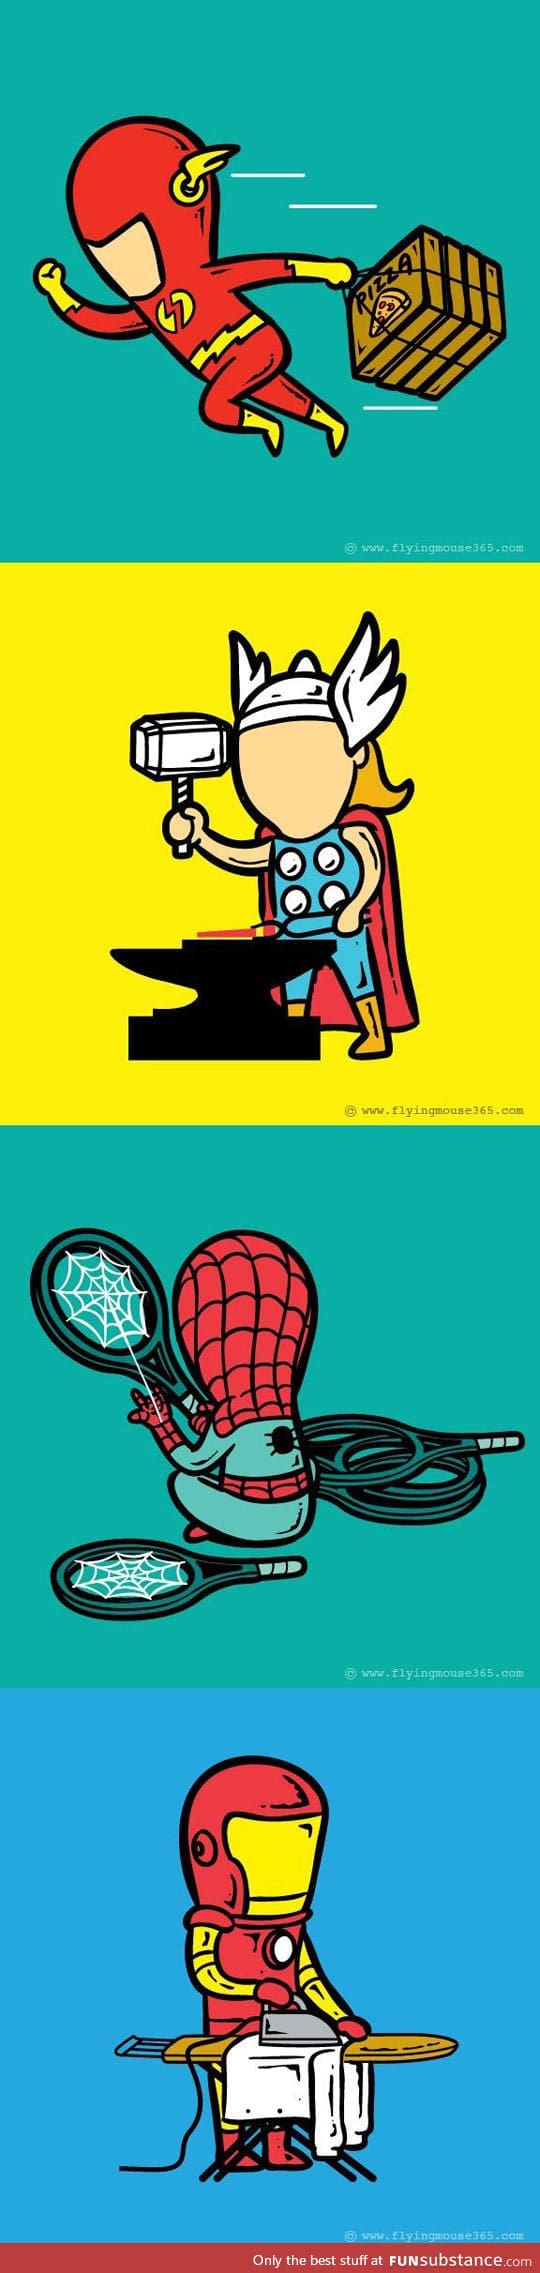 Super heroes and their part time jobs